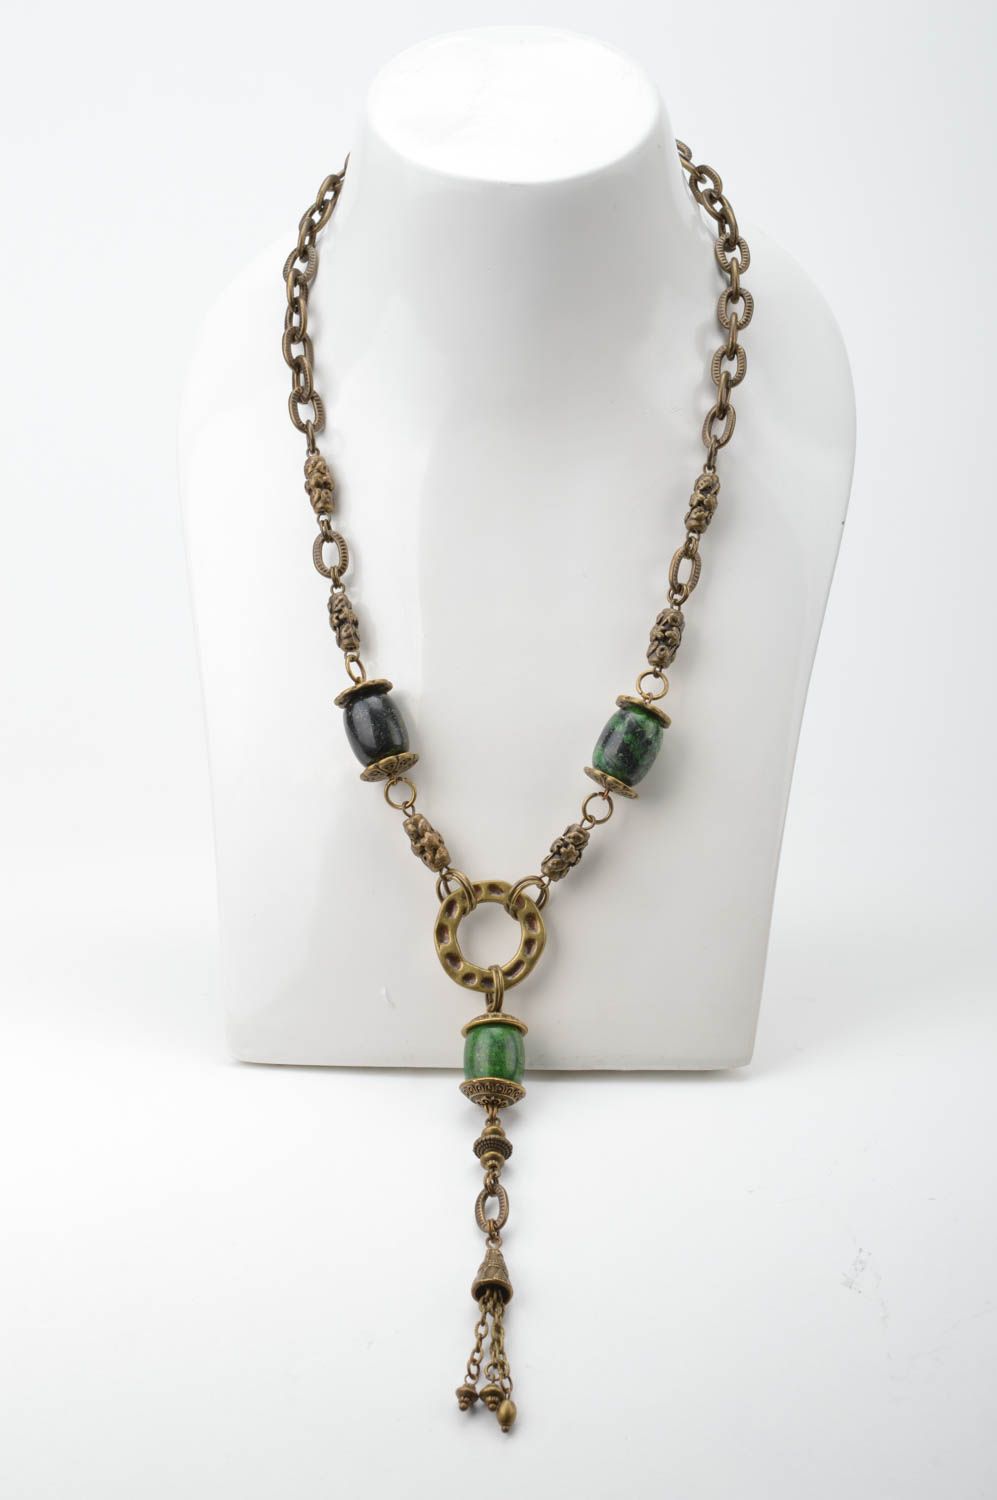 Beautiful massive metal necklace with large green beads designer jewelry photo 3